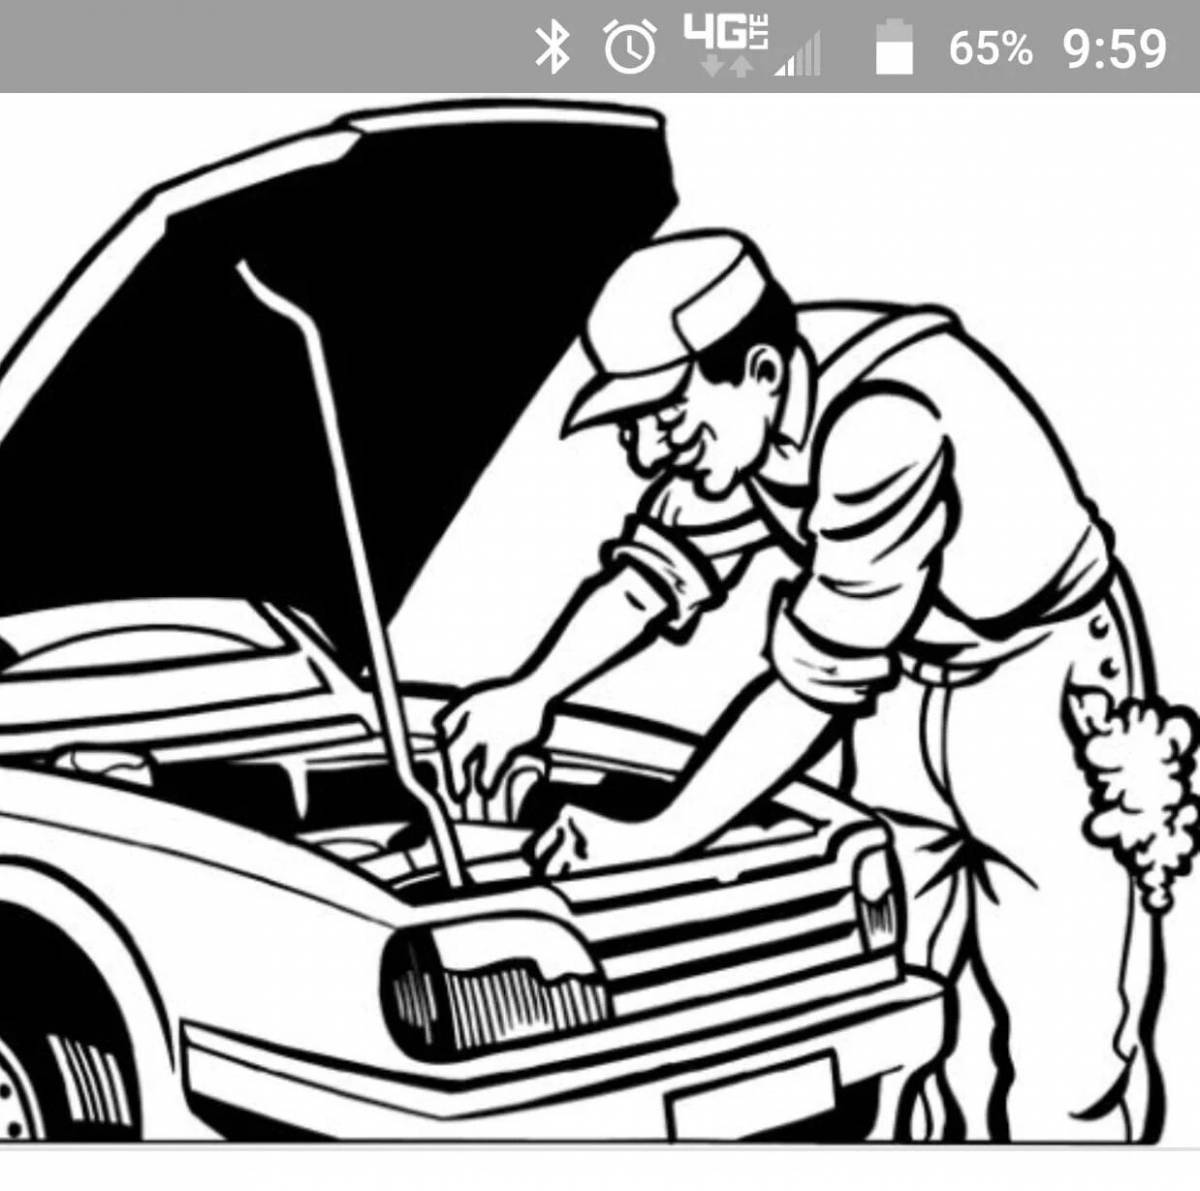 Coloring book playful auto mechanic profession